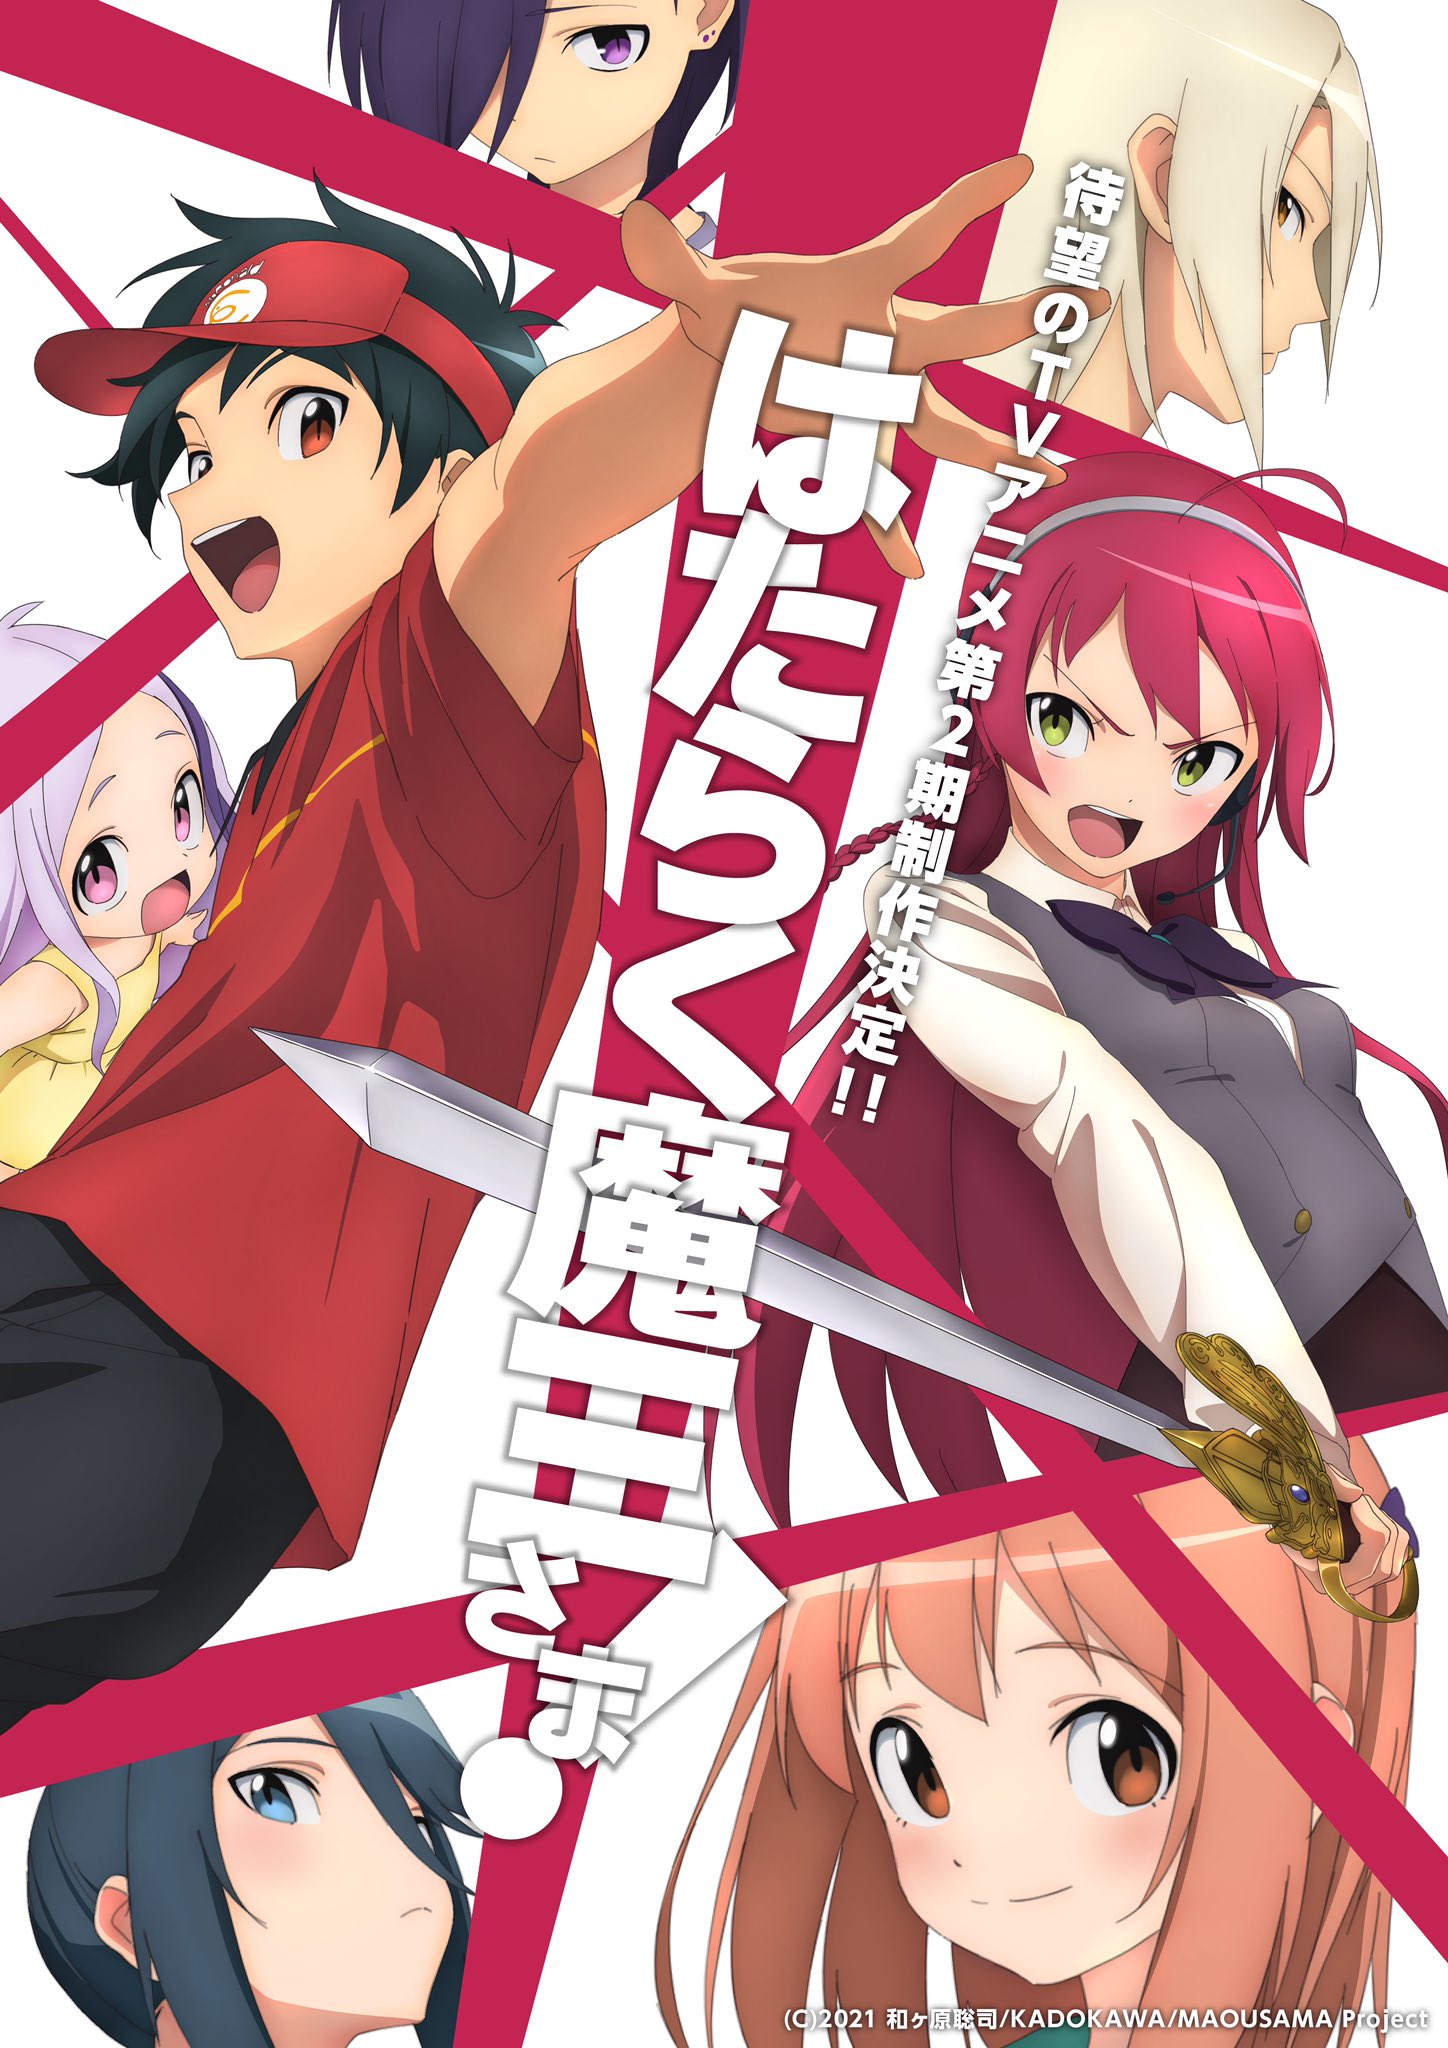 Anime News And Facts on X: The Devil is a Part-Timer is getting